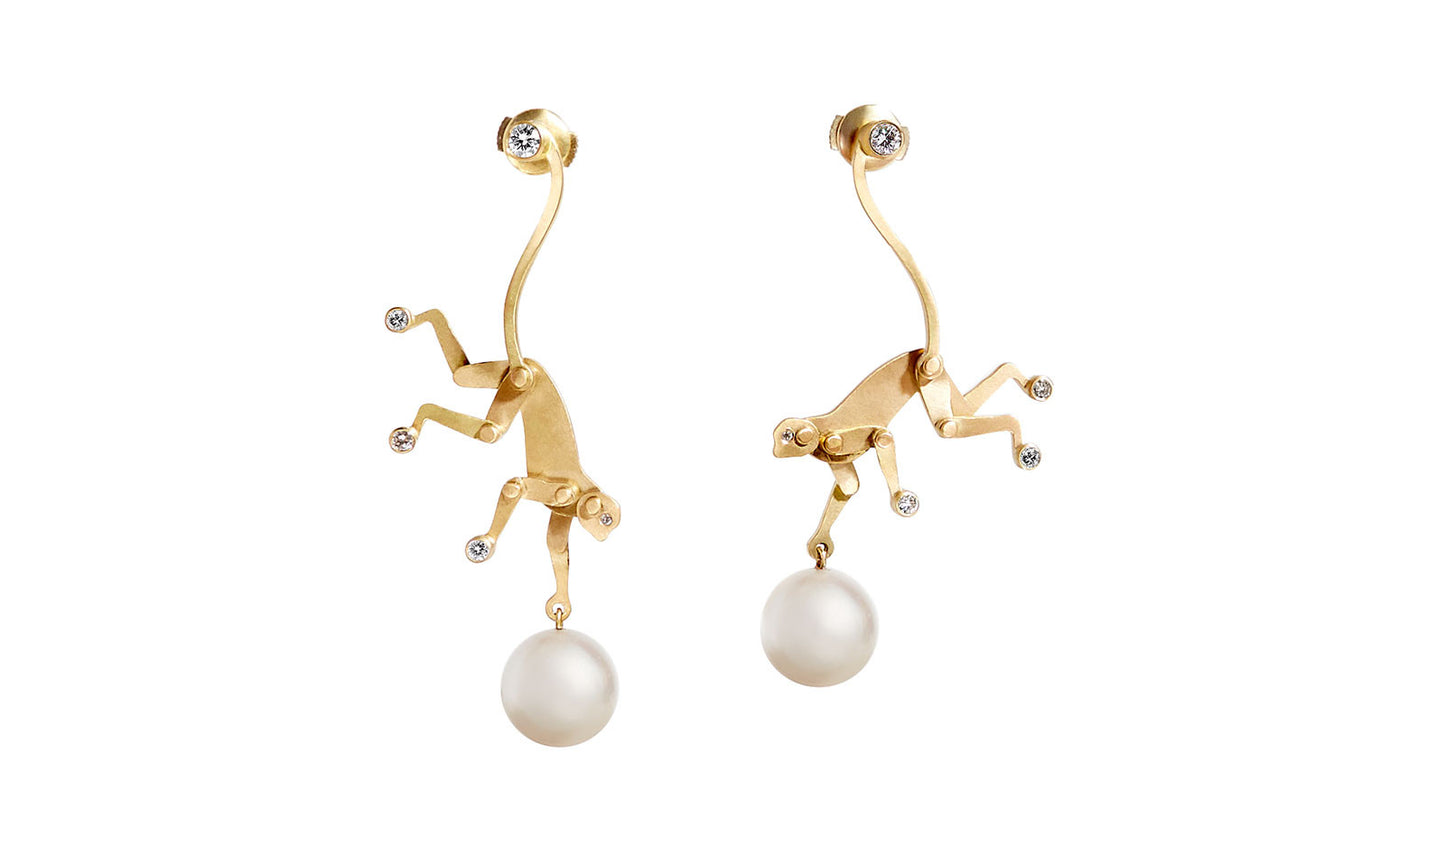 Mini Monkey Earrings | Yellow Gold and Pearls